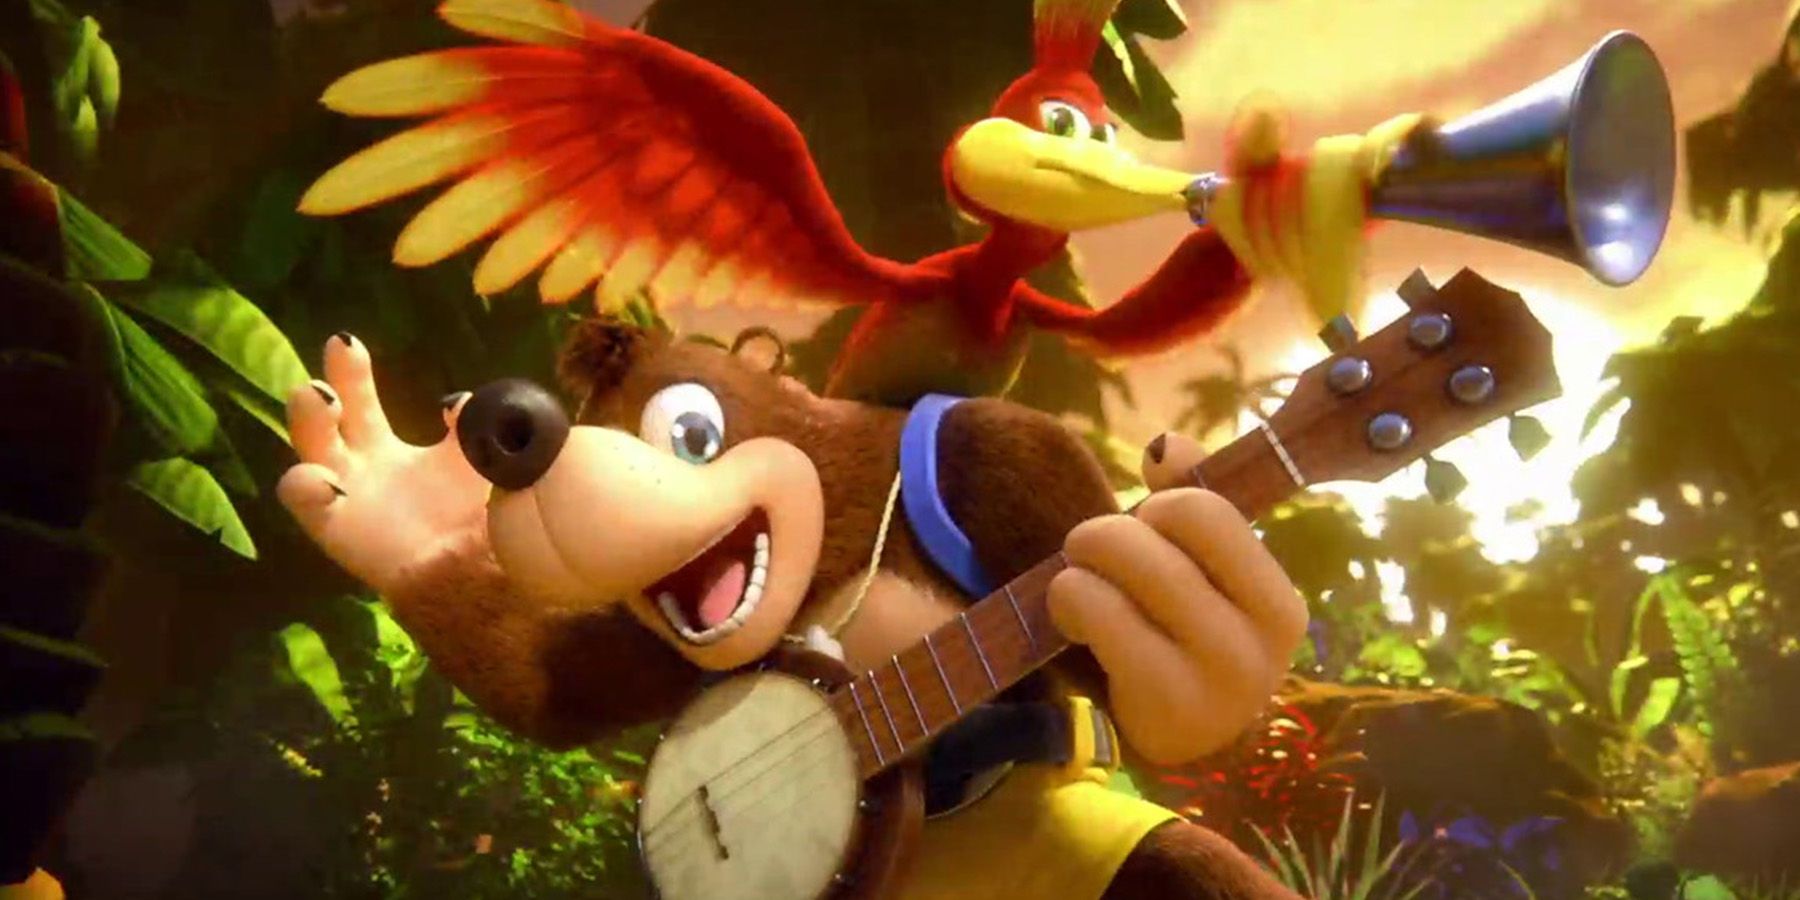 Banjo and Kazooie Smash Bros. Ultimate announcement